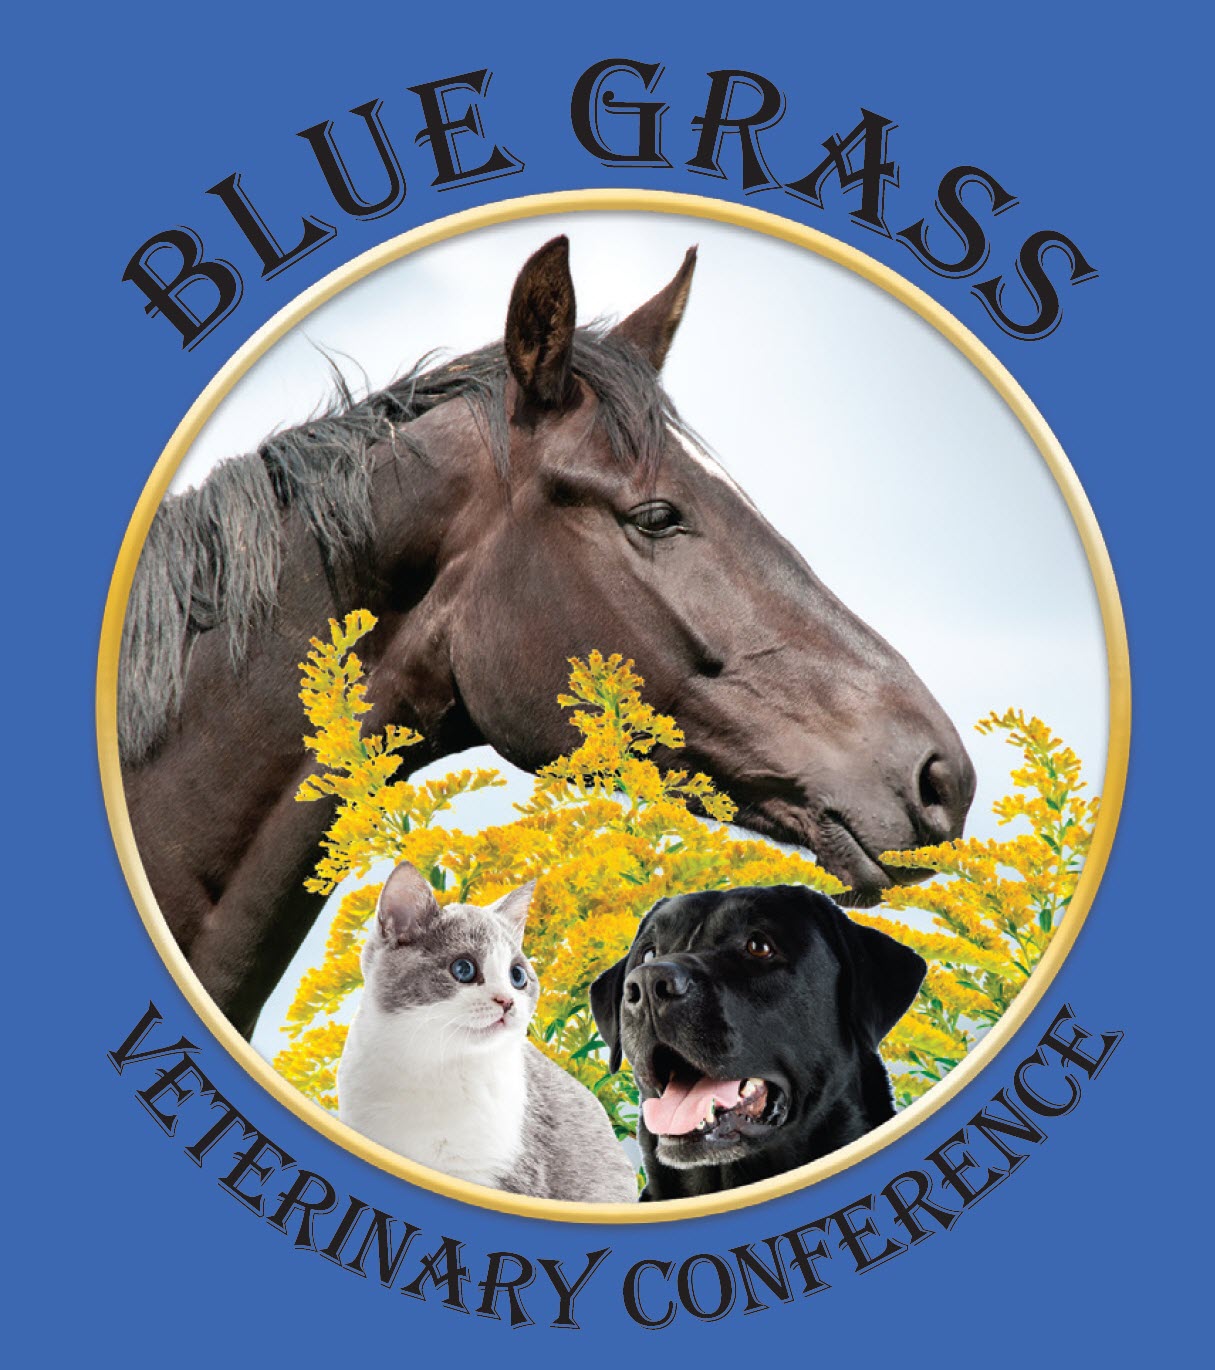 Bluegrass Veterinary Conference